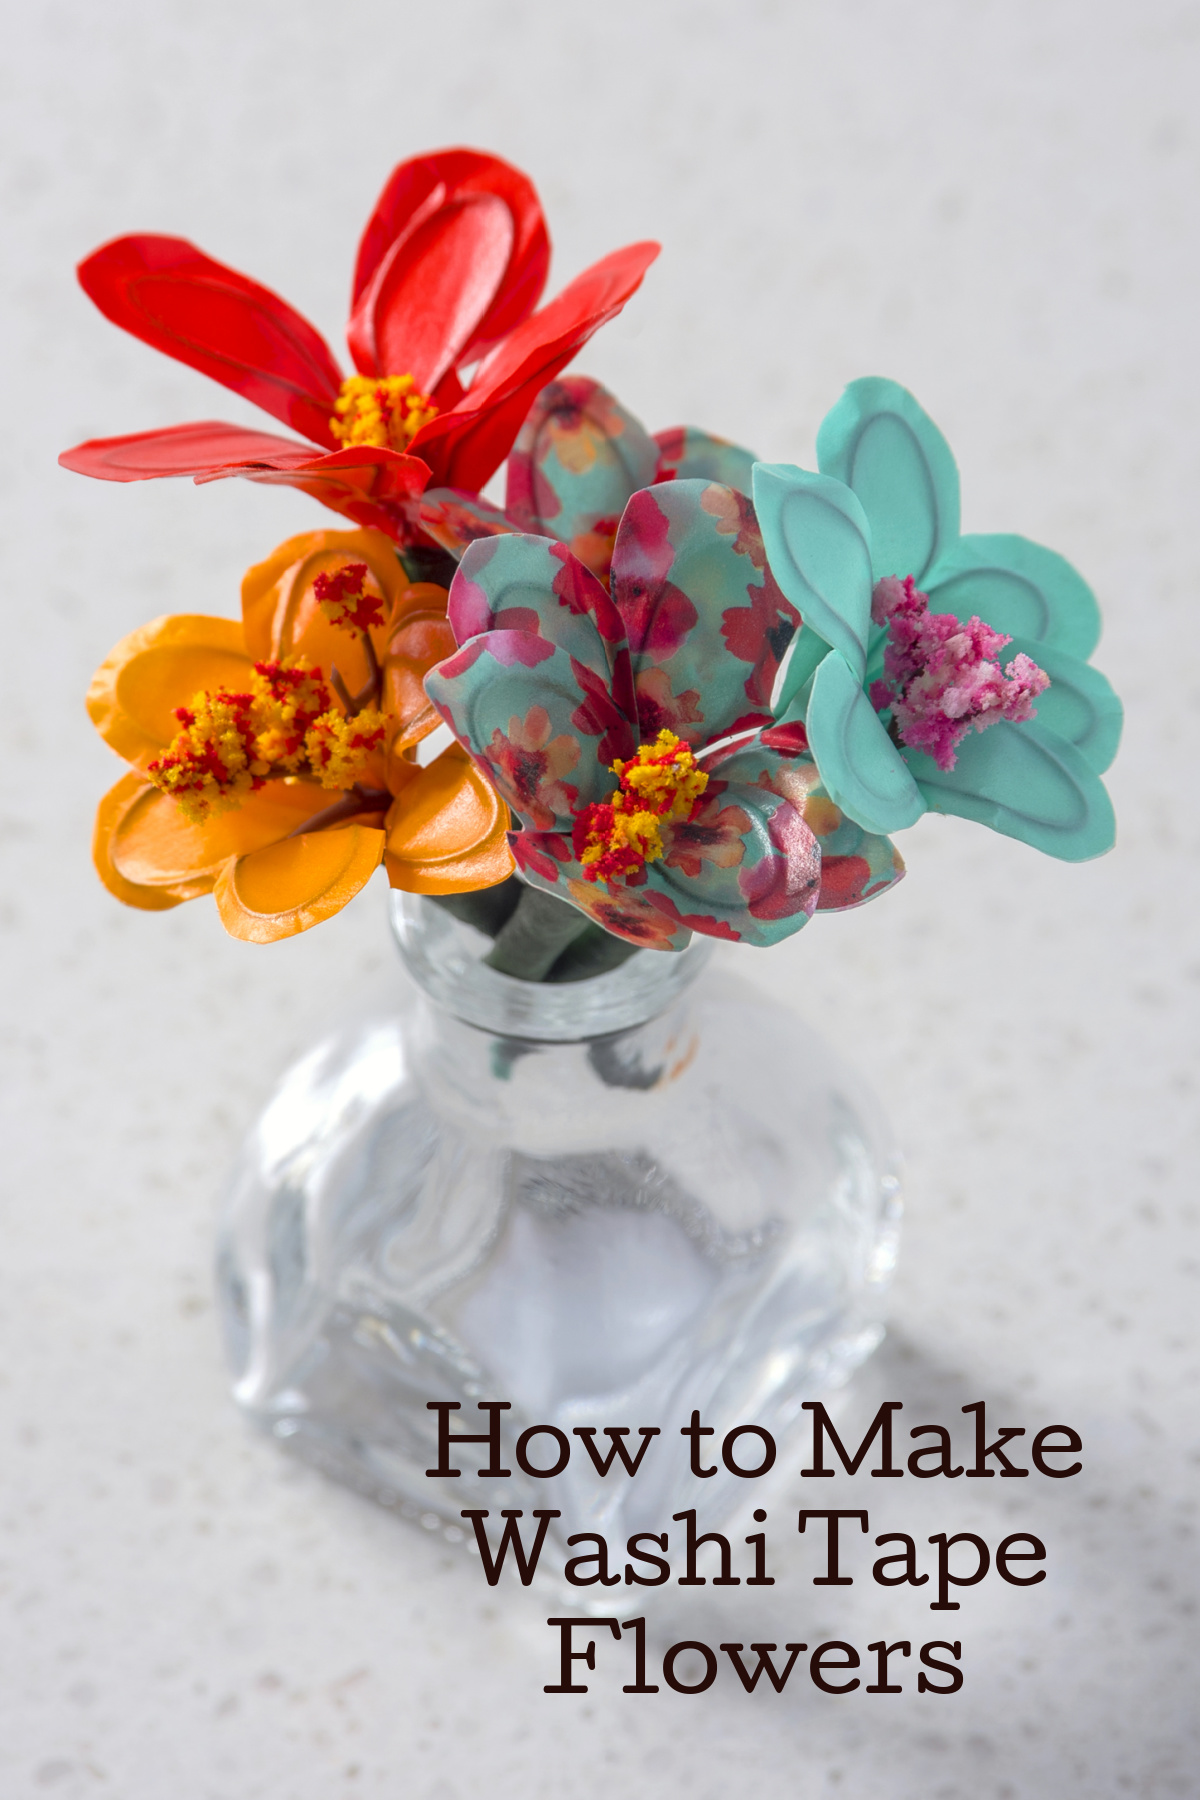 How to Make Washi Tape Flowers